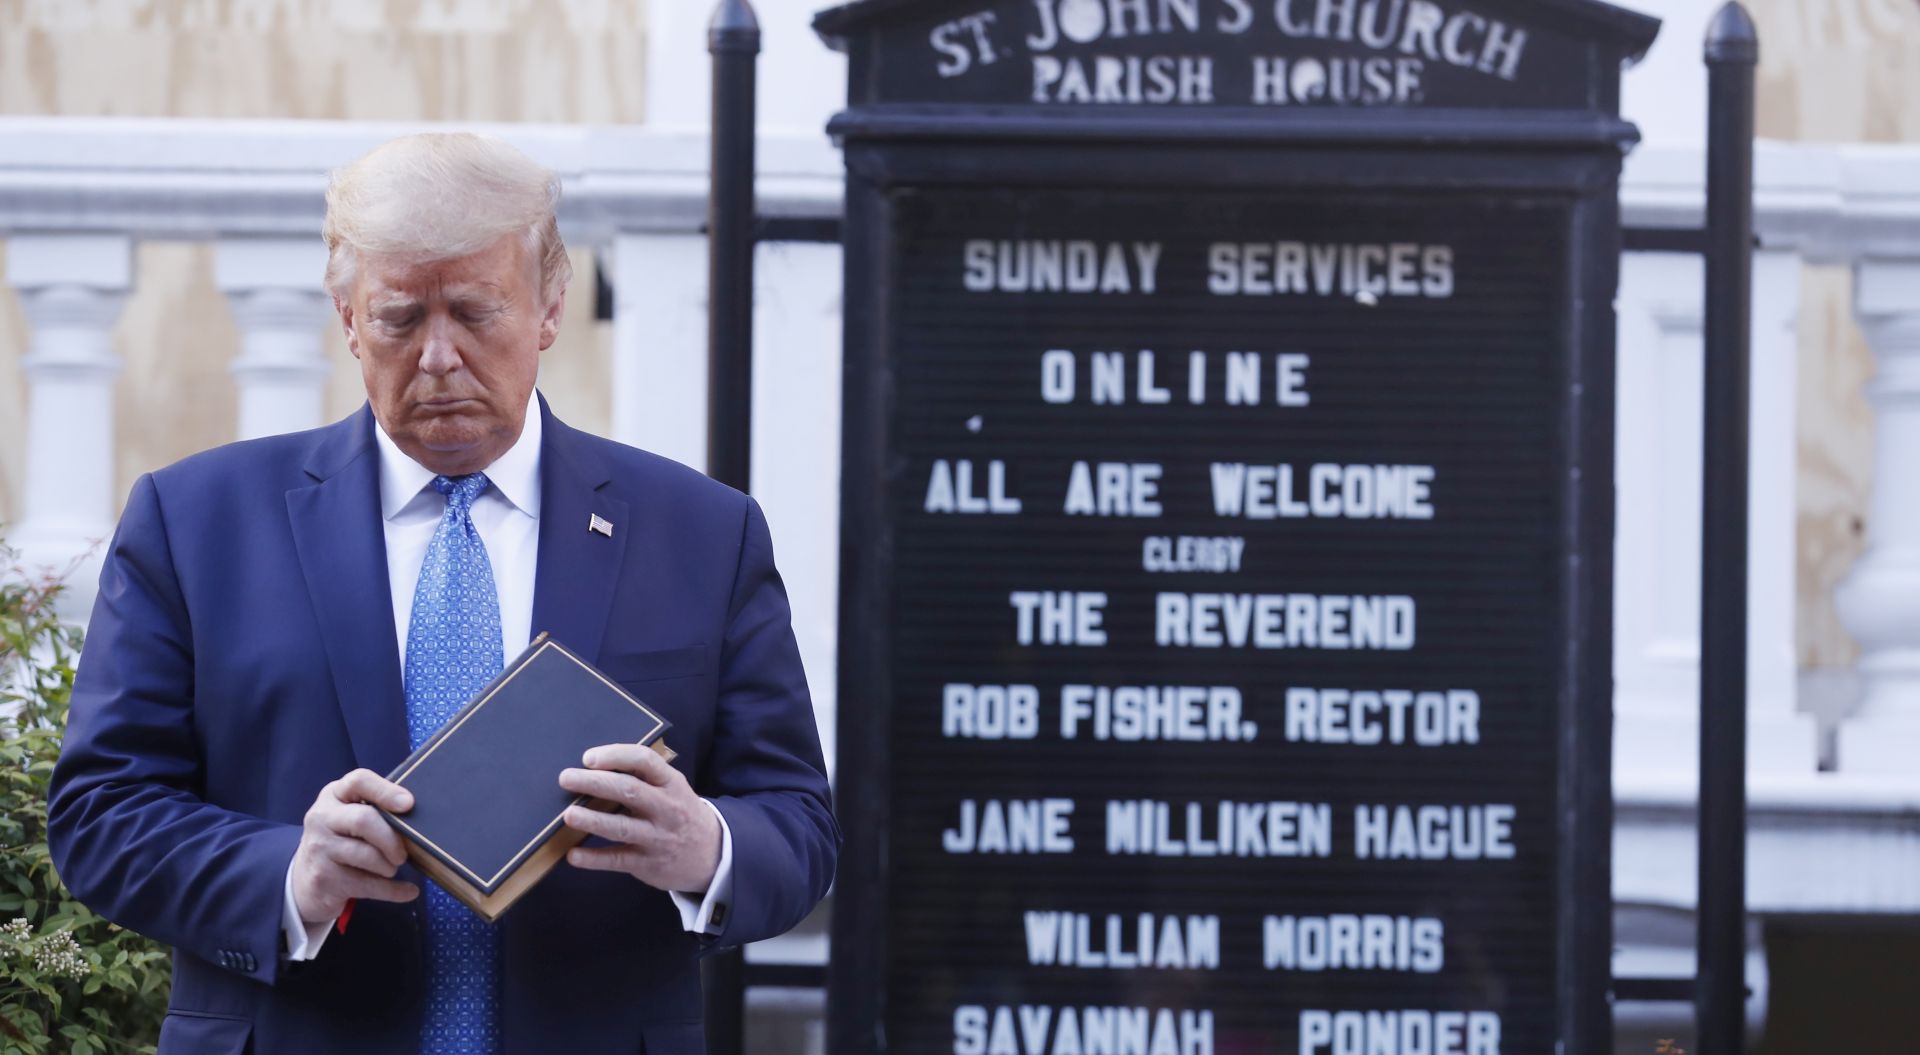 epa08459183 US President Donald J. Trump poses with a bible outside St. John's Episcopal Church after delivering remarks in the Rose Garden at the White House in Washington, DC, USA, 01 June 2020. Trump addressed the nationwide protests following the death of George Floyd in police custody.  EPA/SHAWN THEW